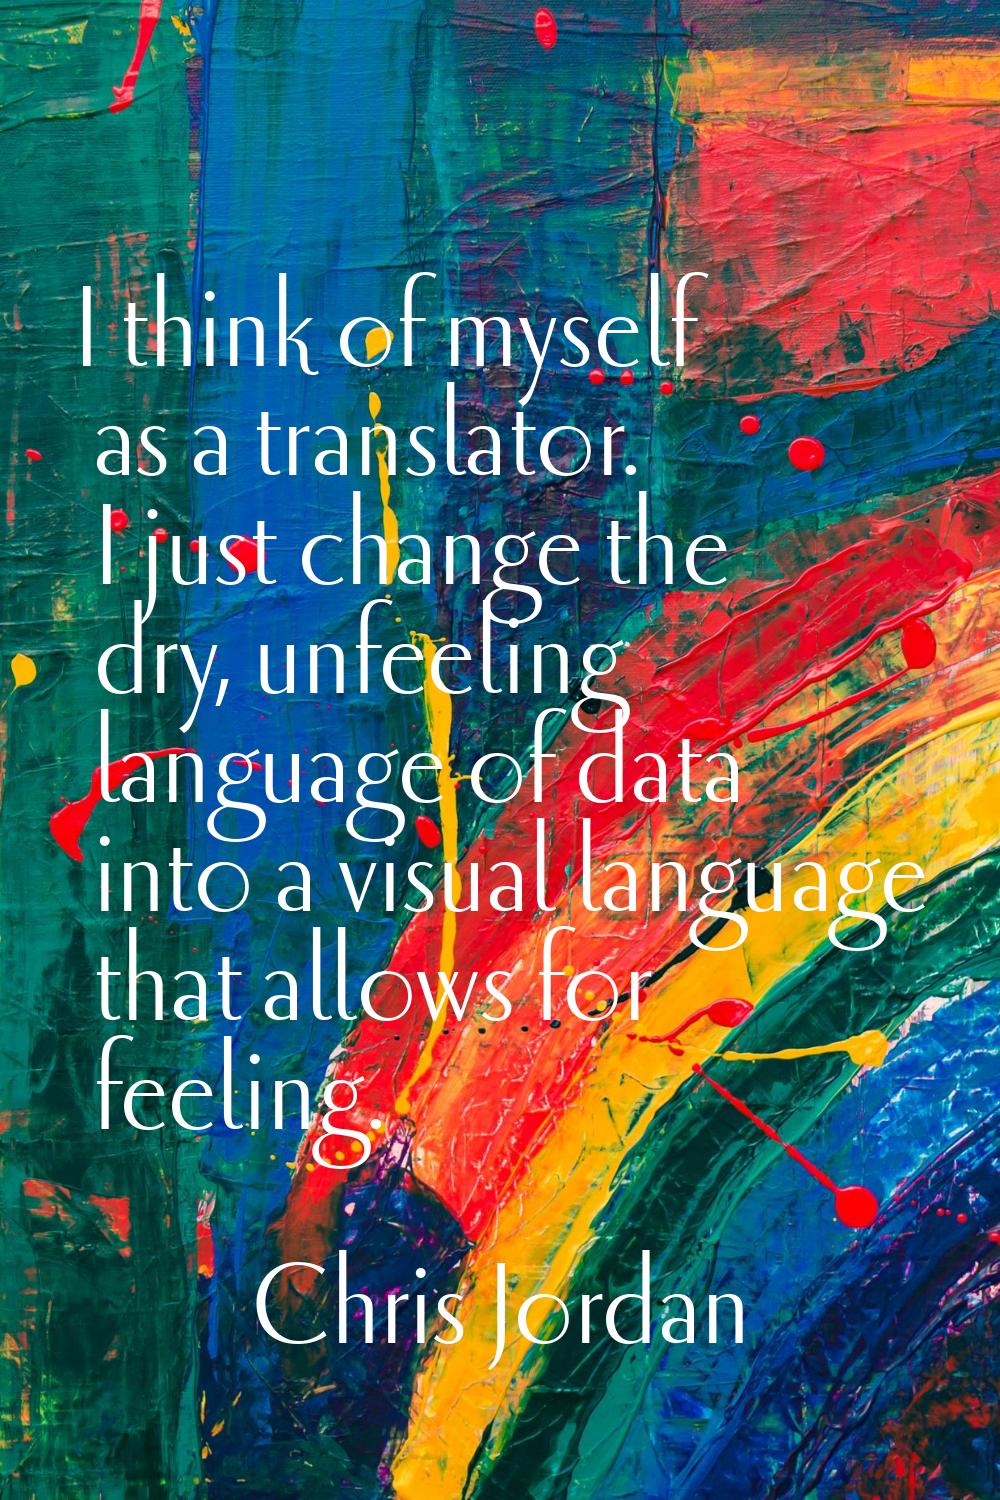 I think of myself as a translator. I just change the dry, unfeeling language of data into a visual 